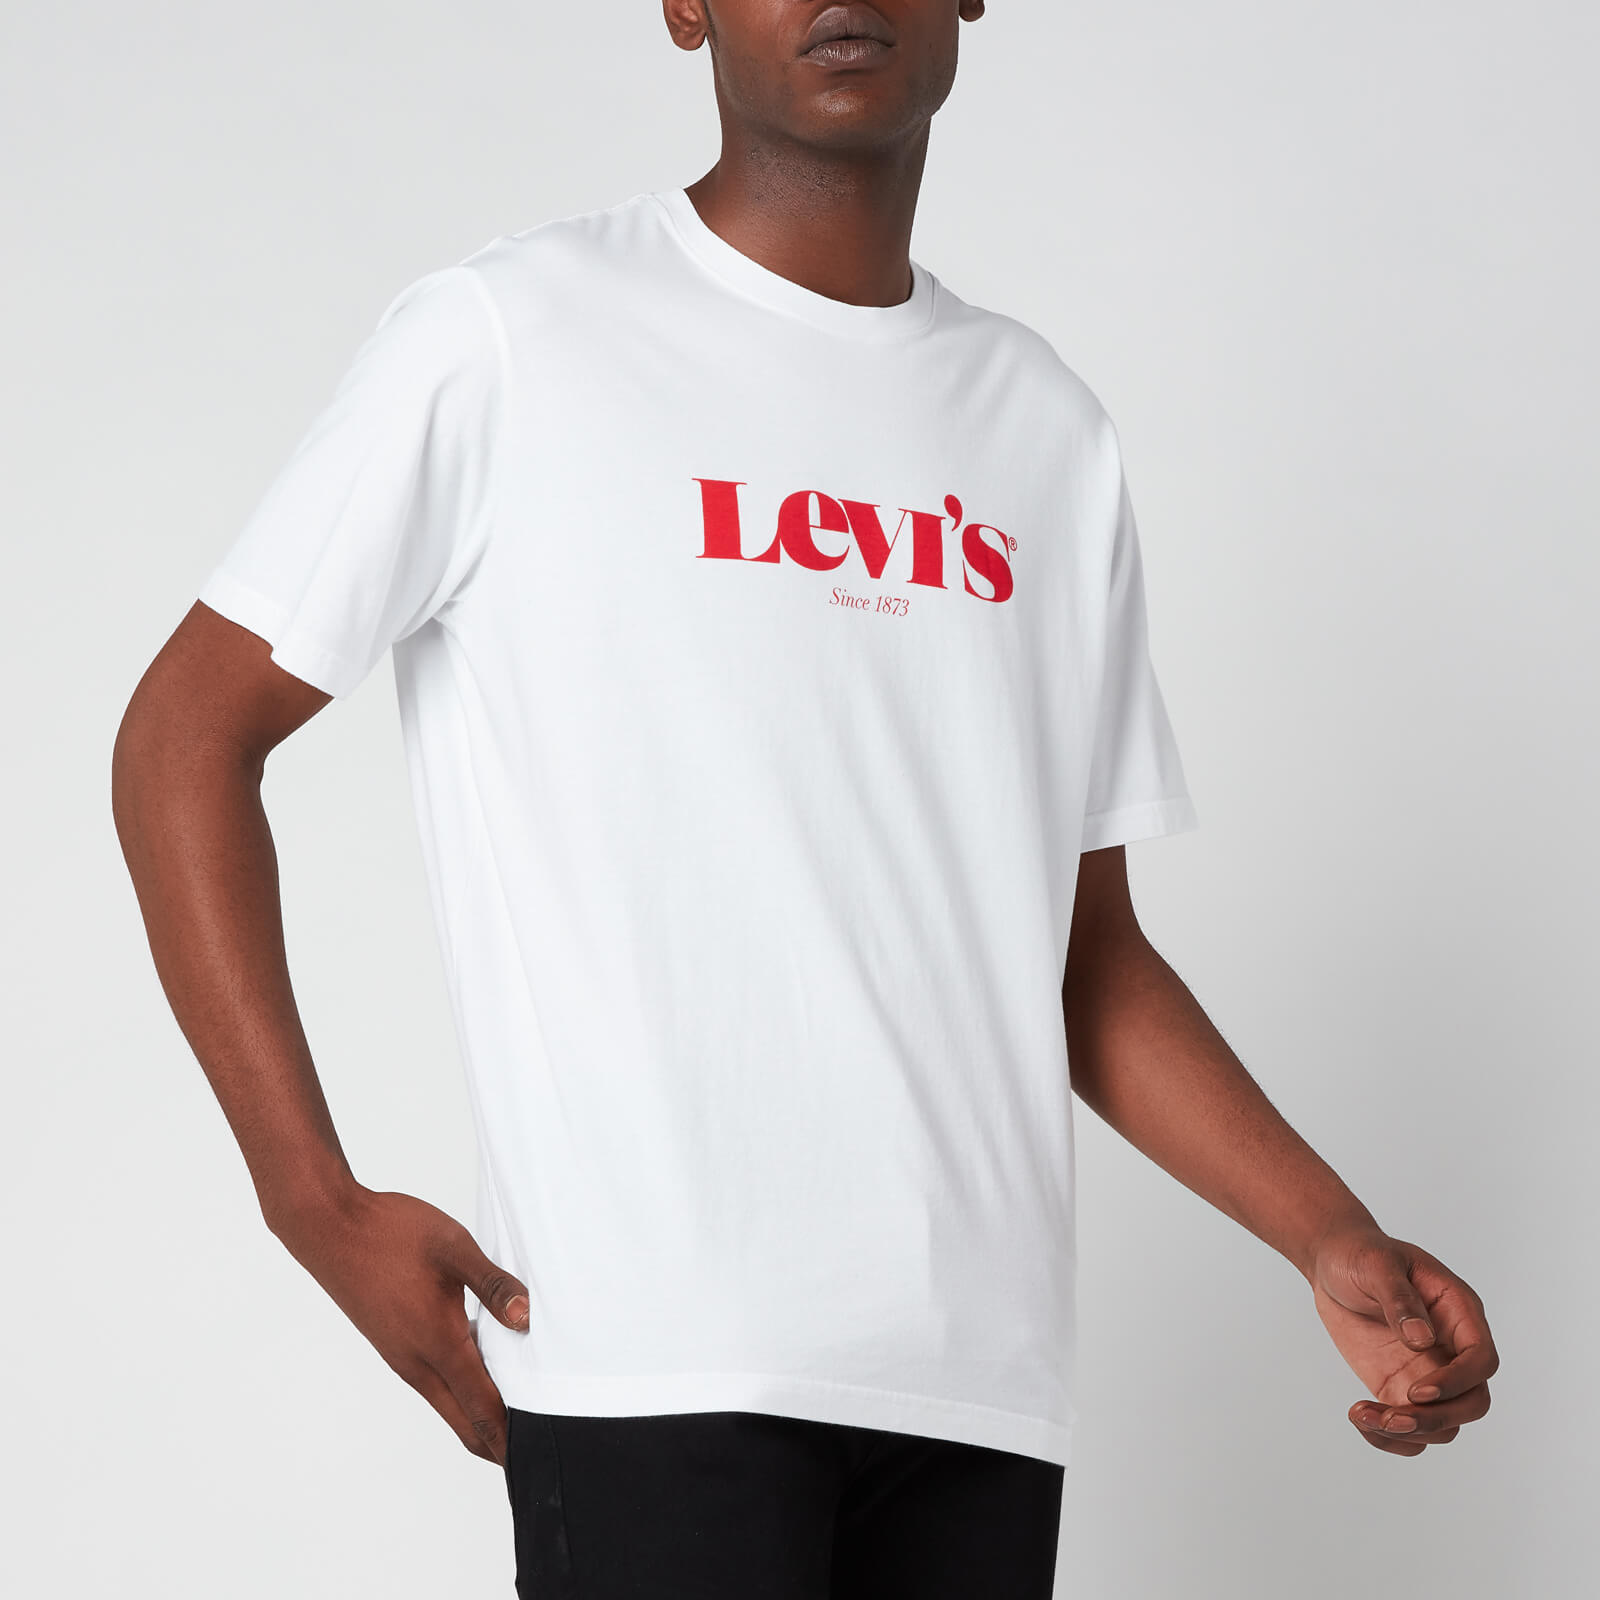 Levi's Men's Relaxed Fit T-Shirt - White - S